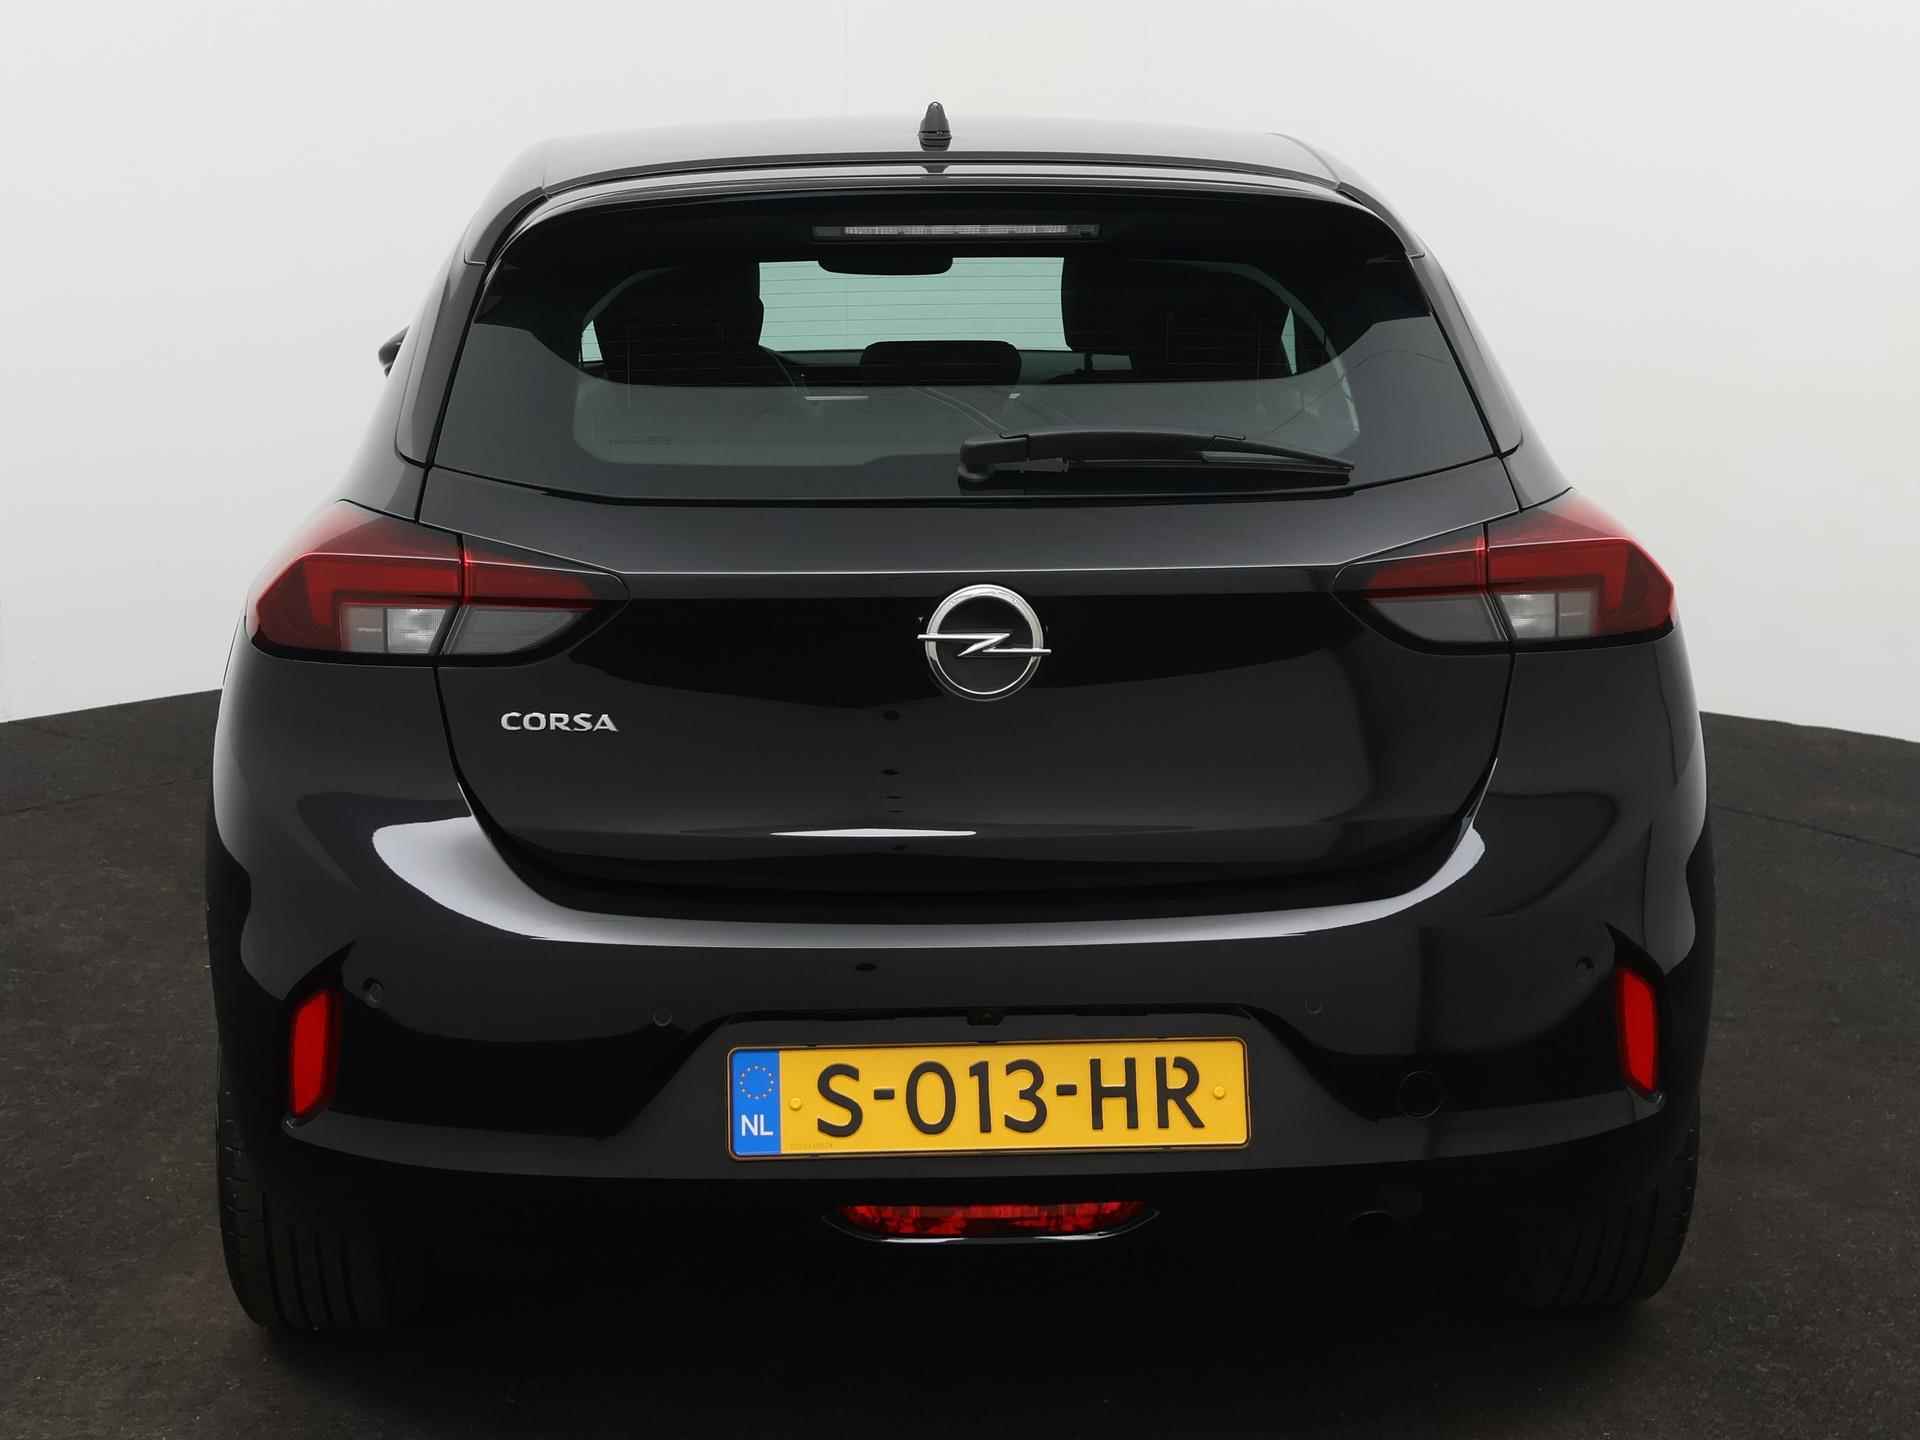 Opel Corsa 1.2 Level 3 | Automaat | Navigatie | Climate control | Apple Carplay/Android Auto - 8/23